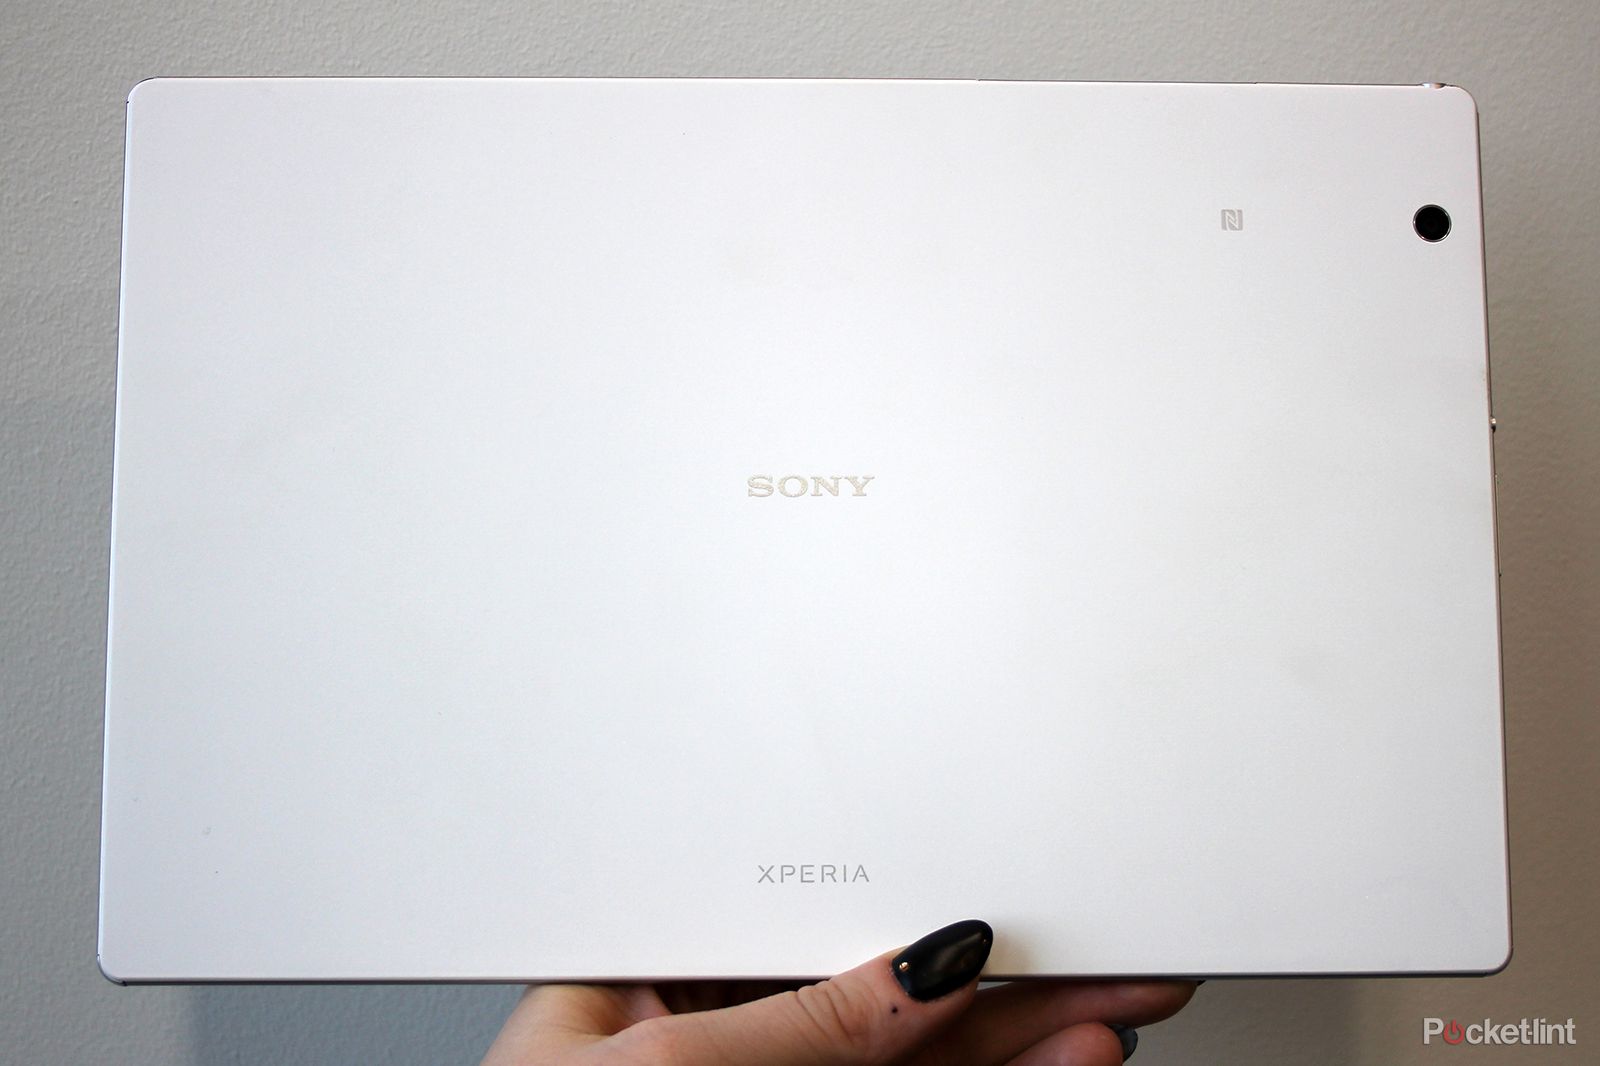 sony xperia z4 tablet hands on slimmer lighter and sexier image 3